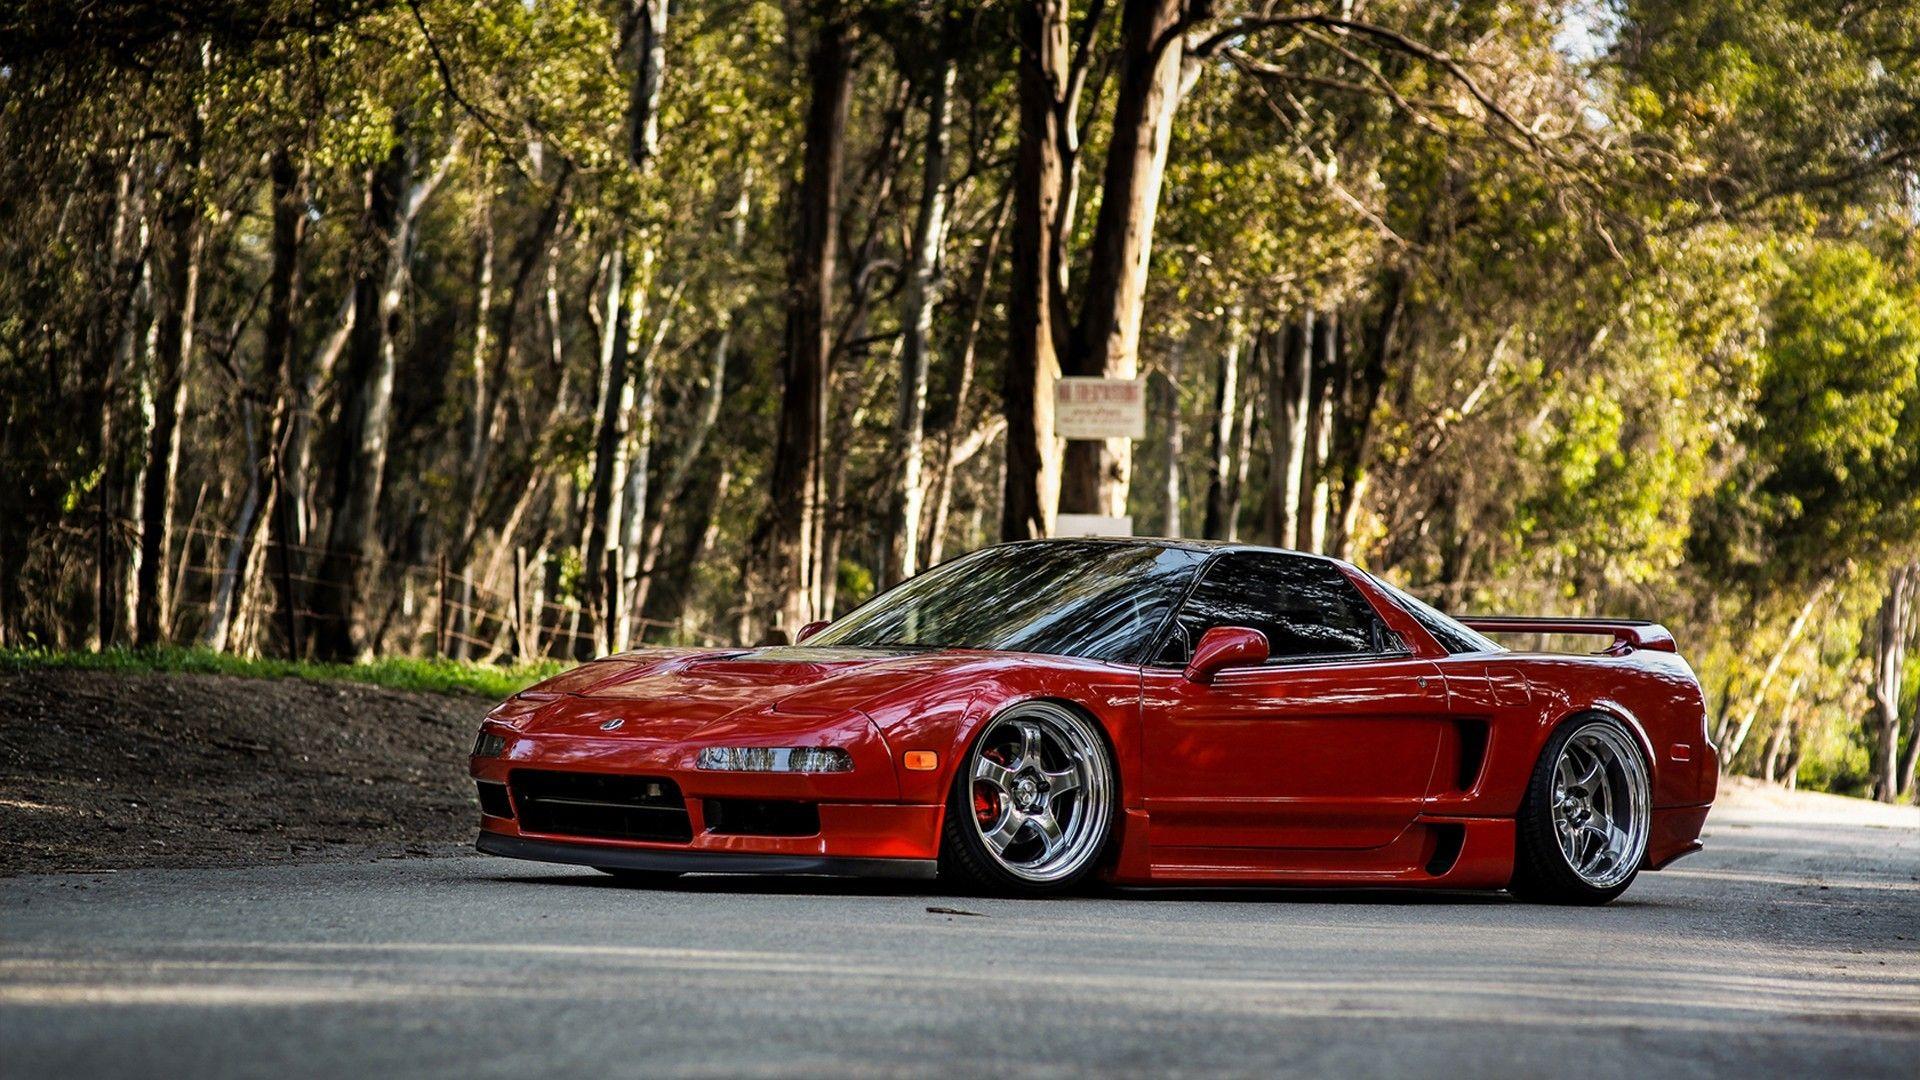 Acura Nsx Jdm wallpapers